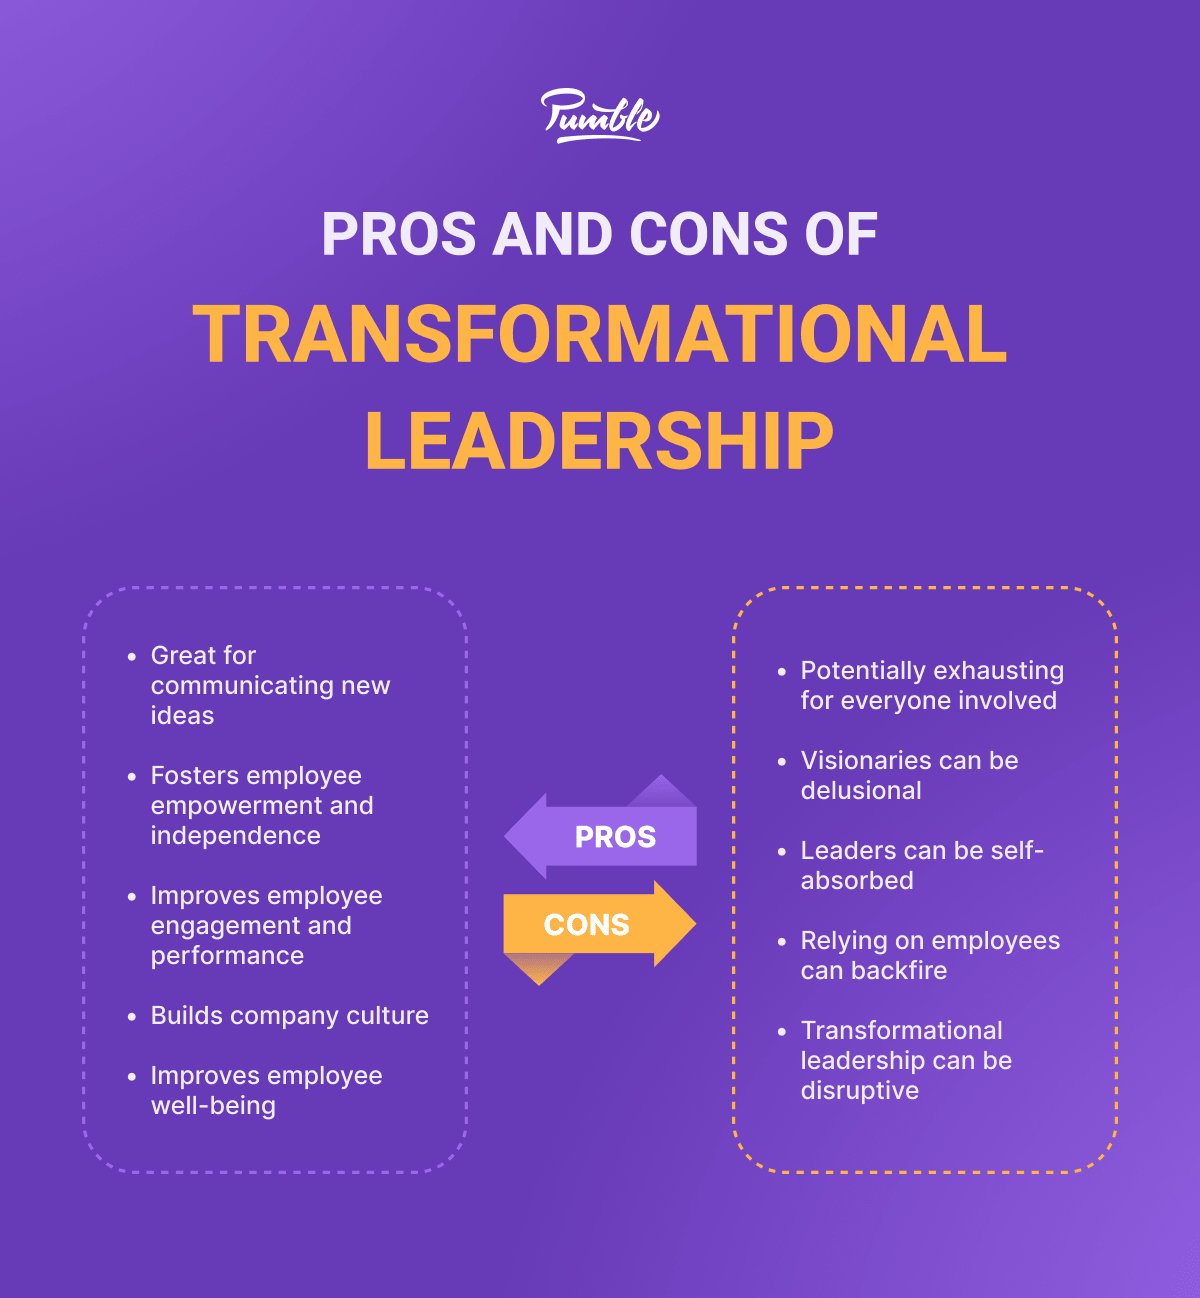 transformational leadership pros and cons